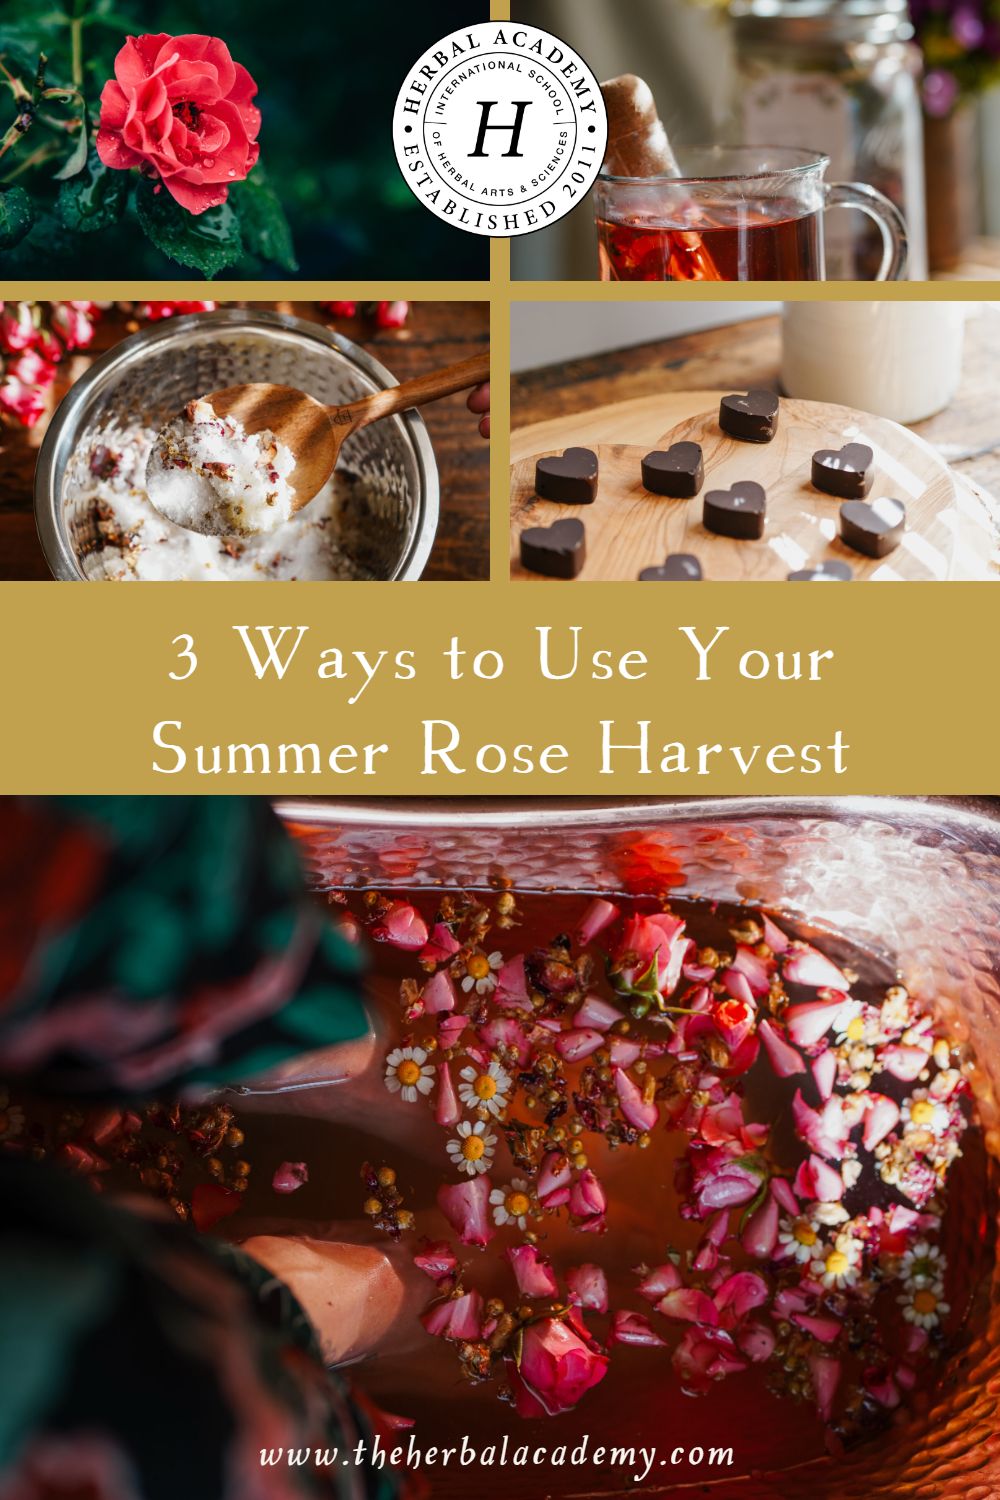 3 Ways to Use Your Summer Rose Harvest | Herbal Academy | We are shining a spotlight on the iconic rose by using it in these 3 self-care recipes you can share with others or spoil yourself with!